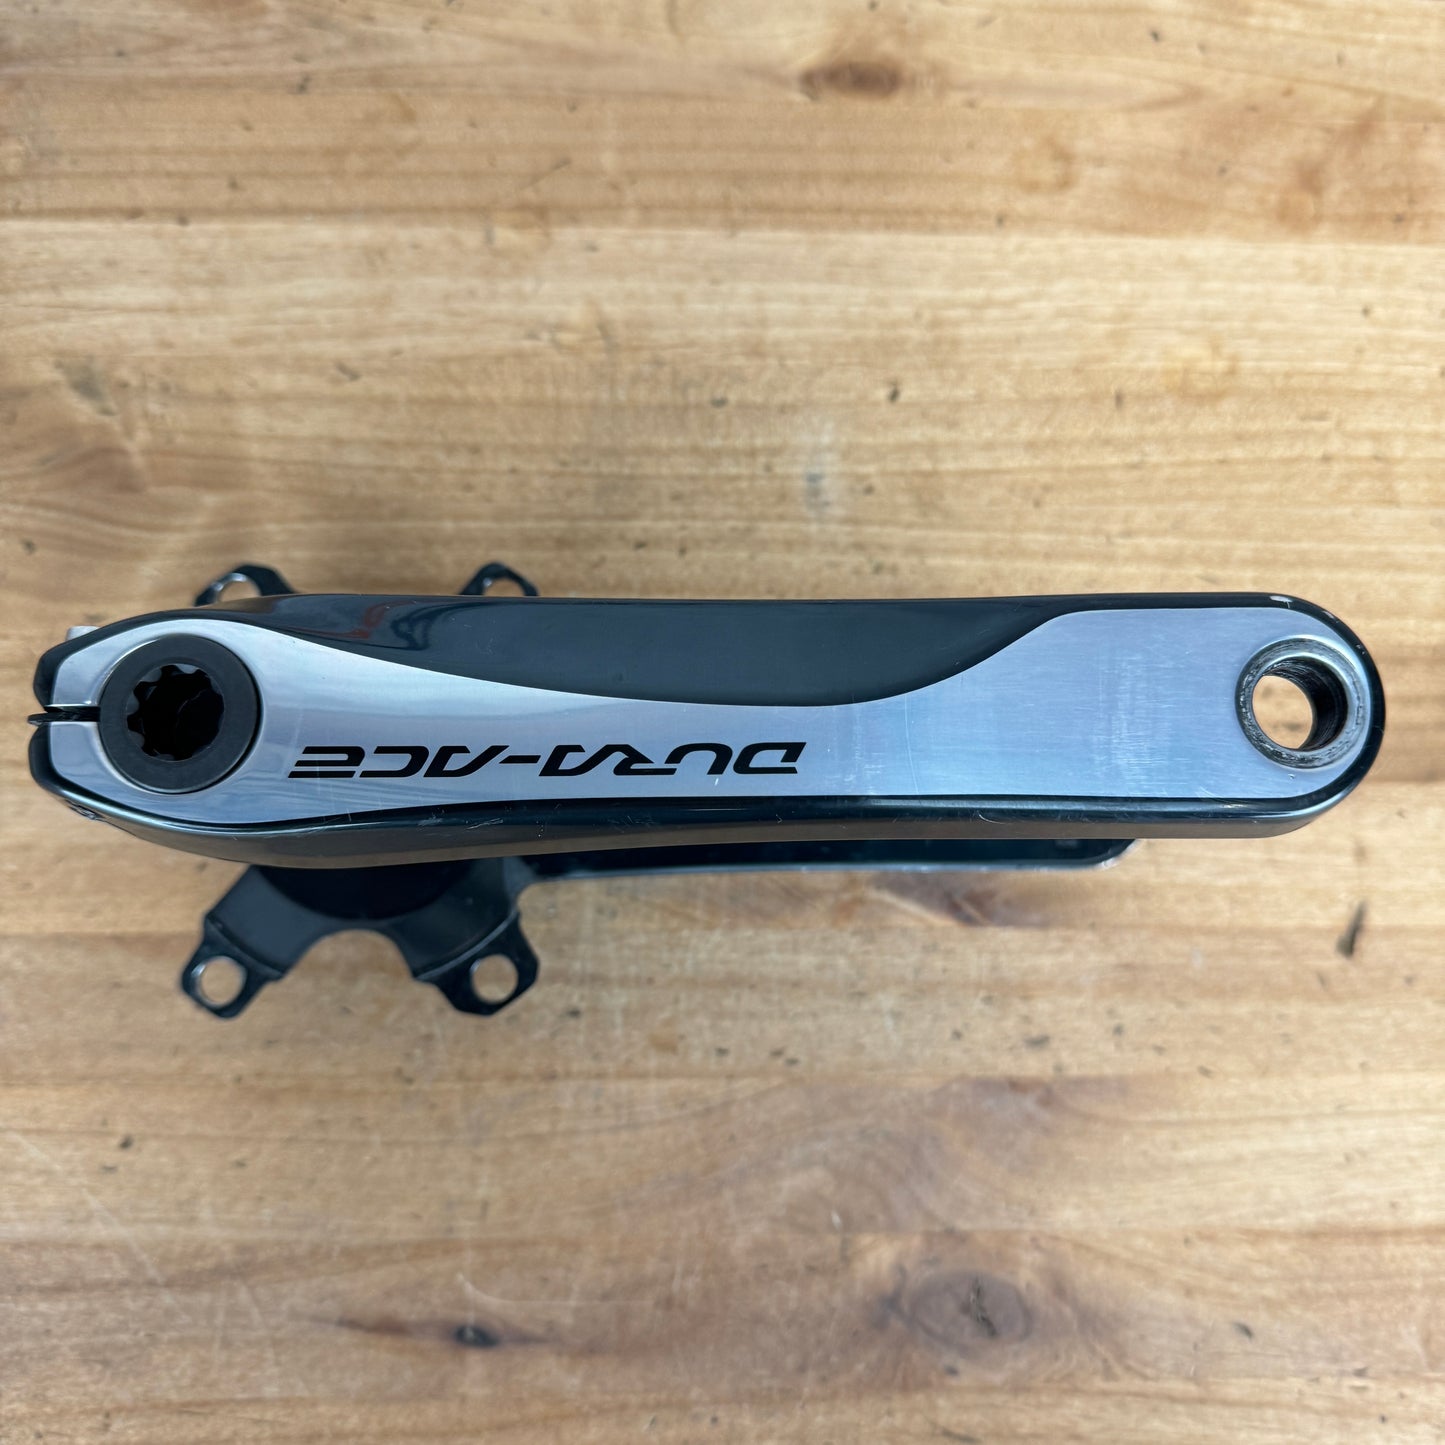 Shimano Dura-Ace FC-9000 175mm 110BCD 4-Bolt Alloy Bike Crank Arms Passed Recall